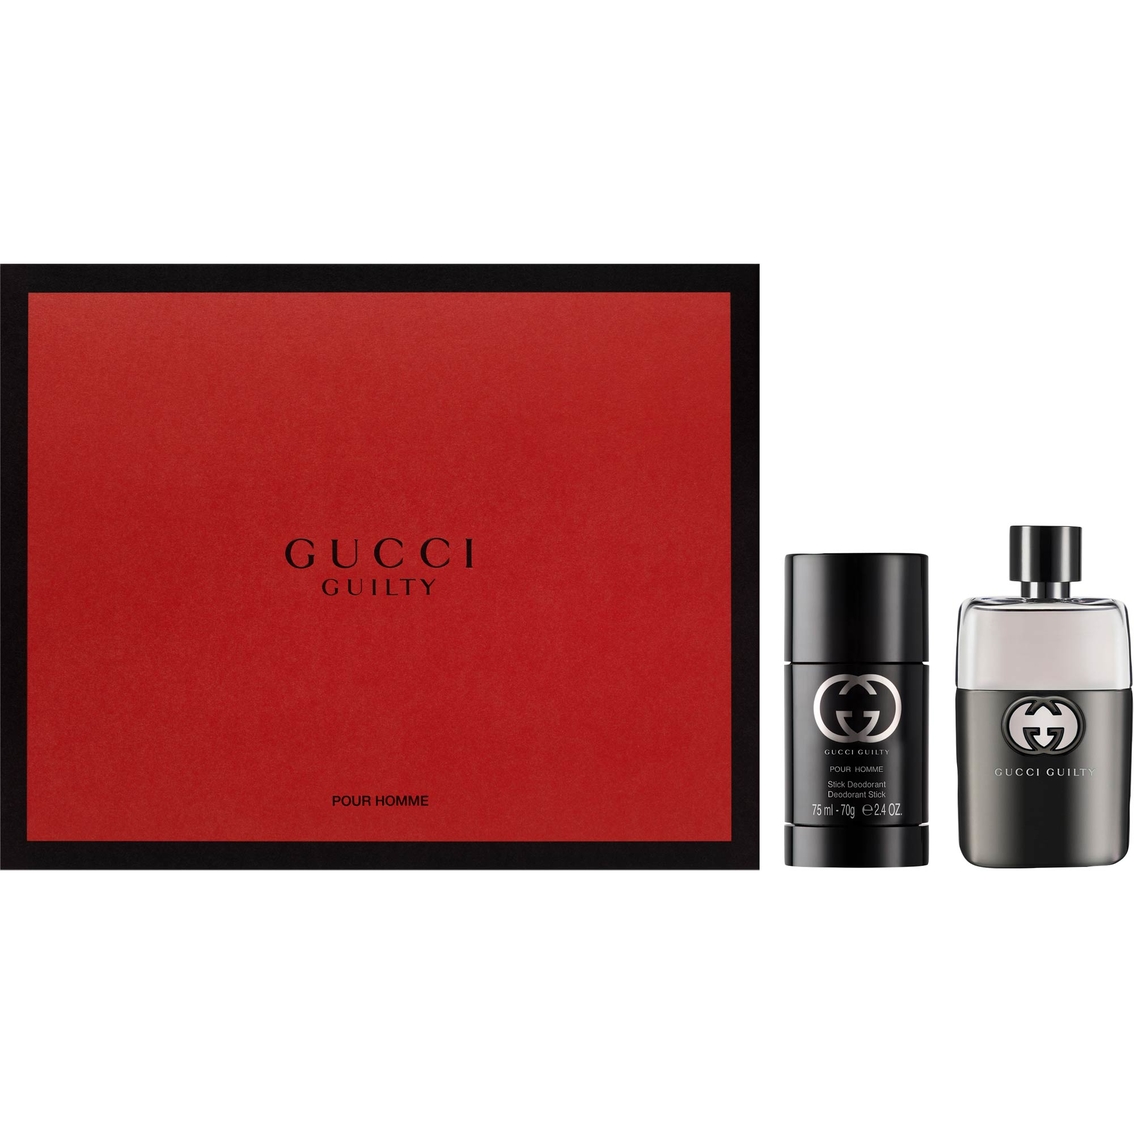 Guuci Guilty Pour Homme 2 Pc. Gift Set 